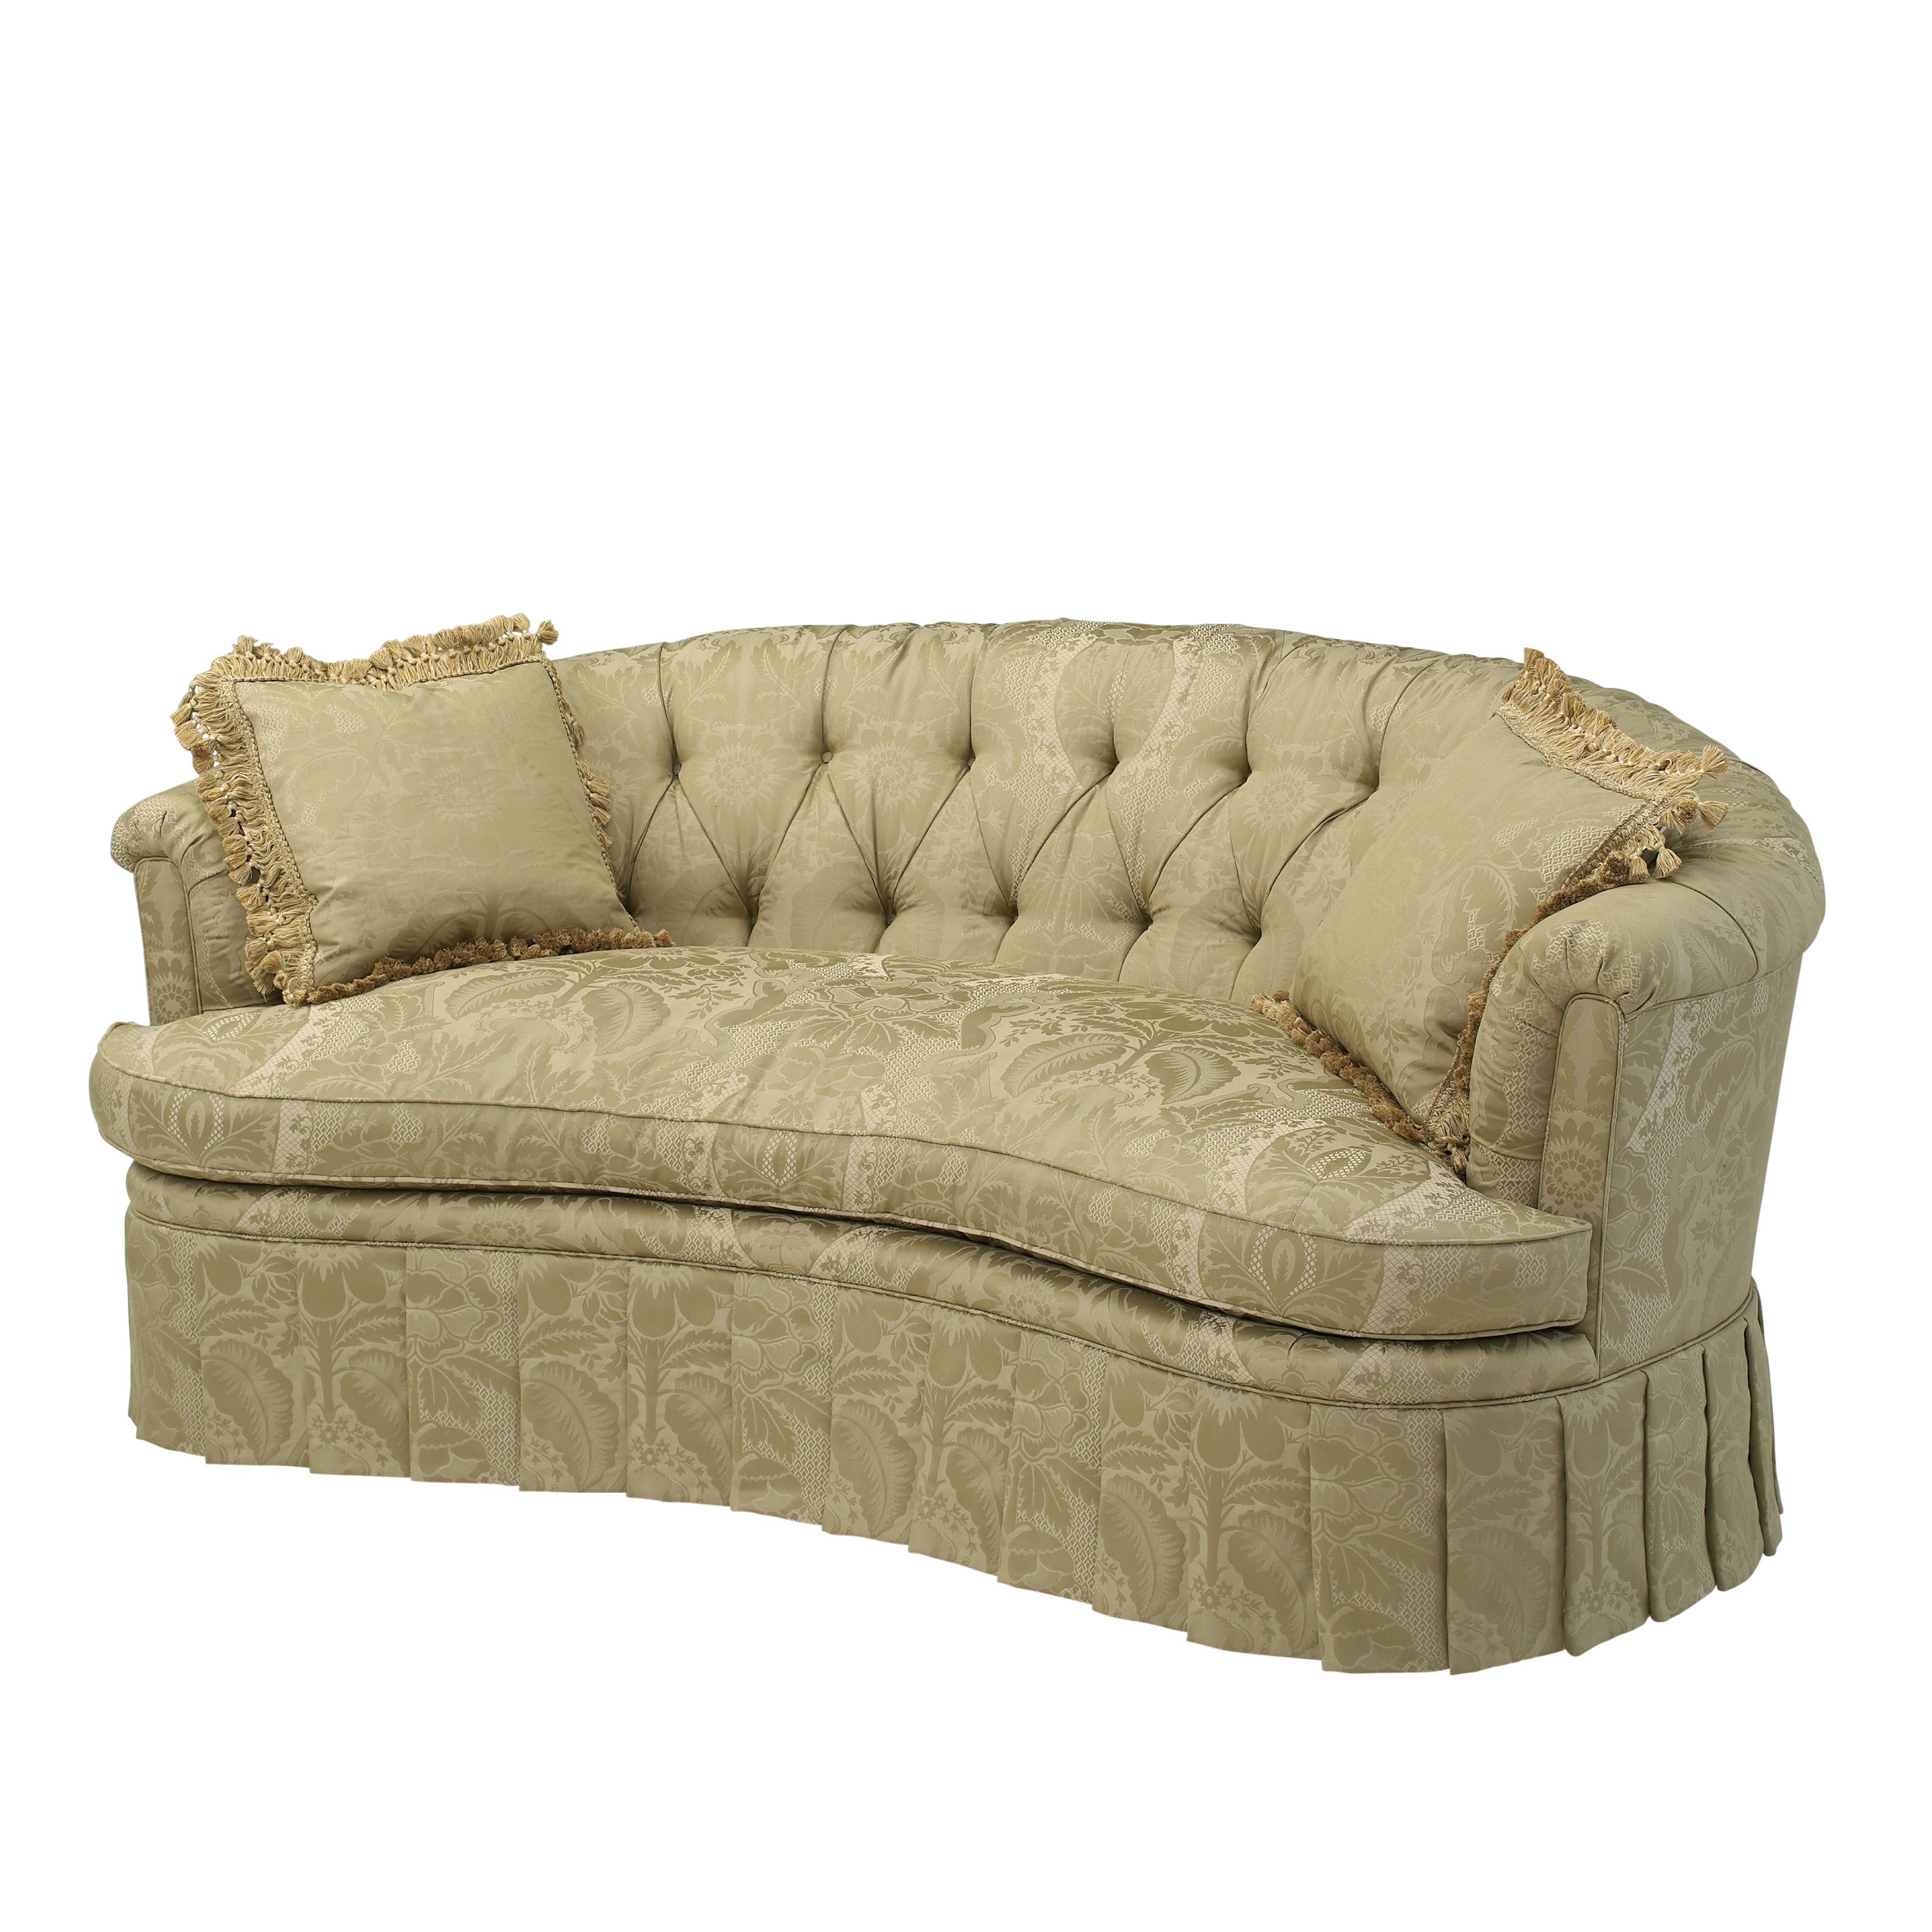 Curved back tufted sofa